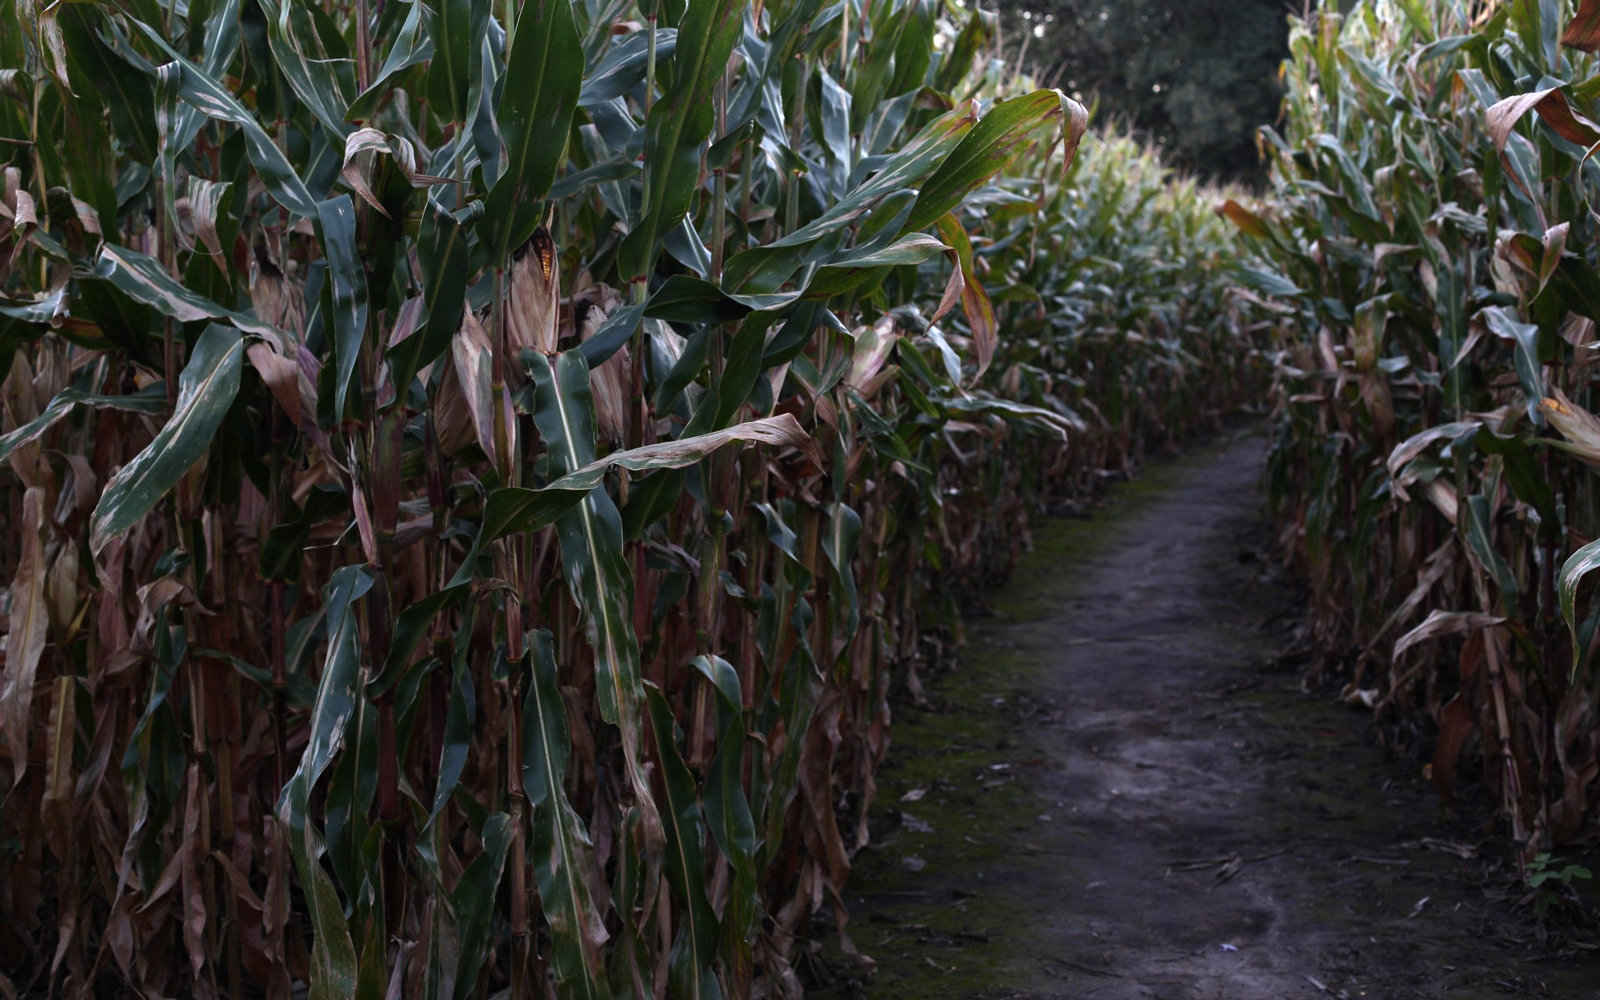 The Country S Creepiest Haunted Corn Mazes For Halloween Travel